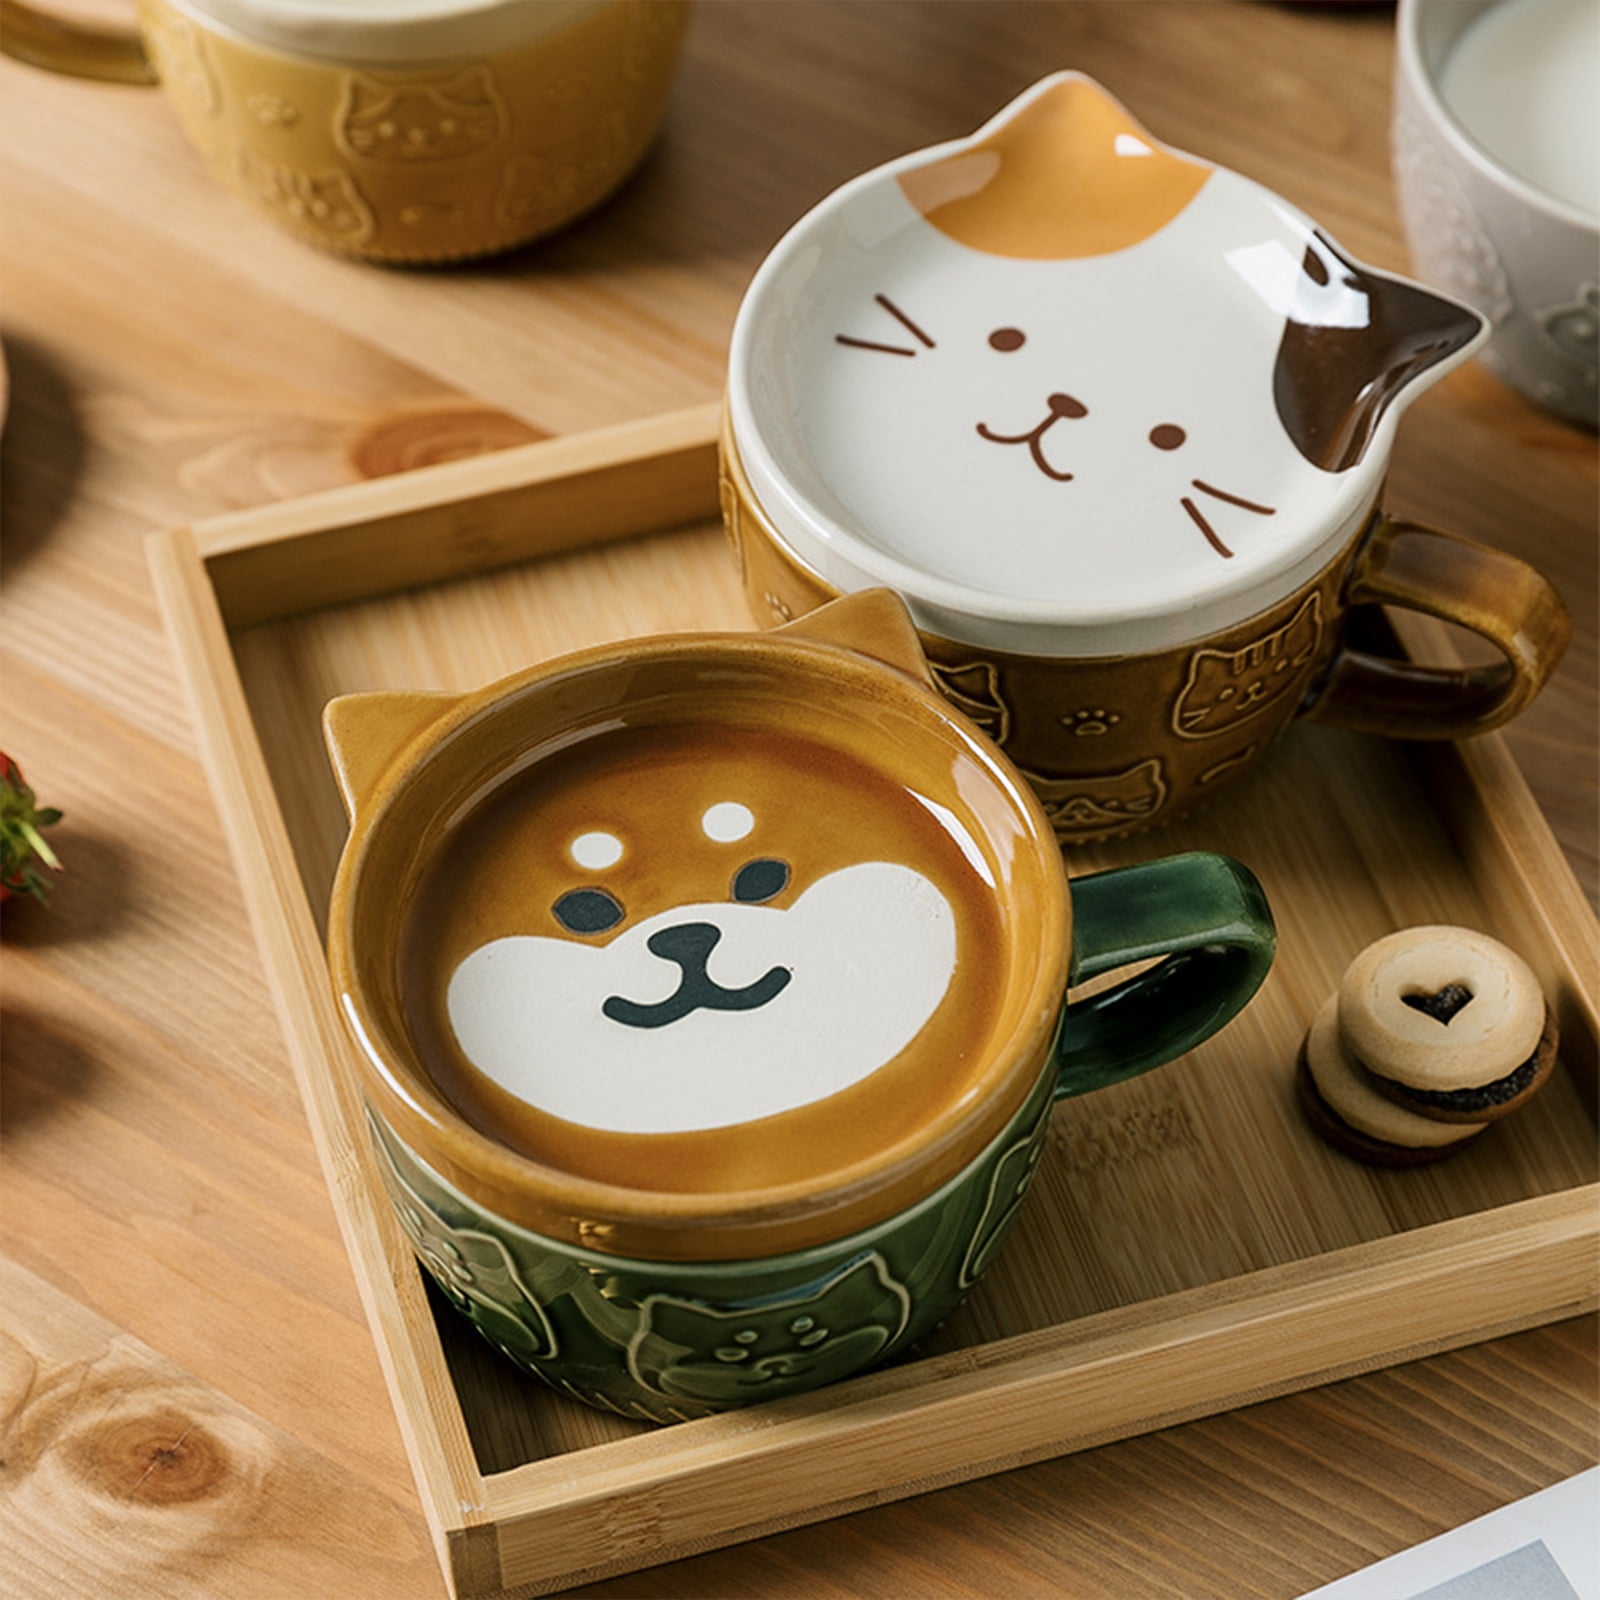 GENTI Kawaii Cup Ceramic Cat Mug Set of 2 Couple Cat Cup Stackable Cute Tea  Cups for Women Gift For …See more GENTI Kawaii Cup Ceramic Cat Mug Set of